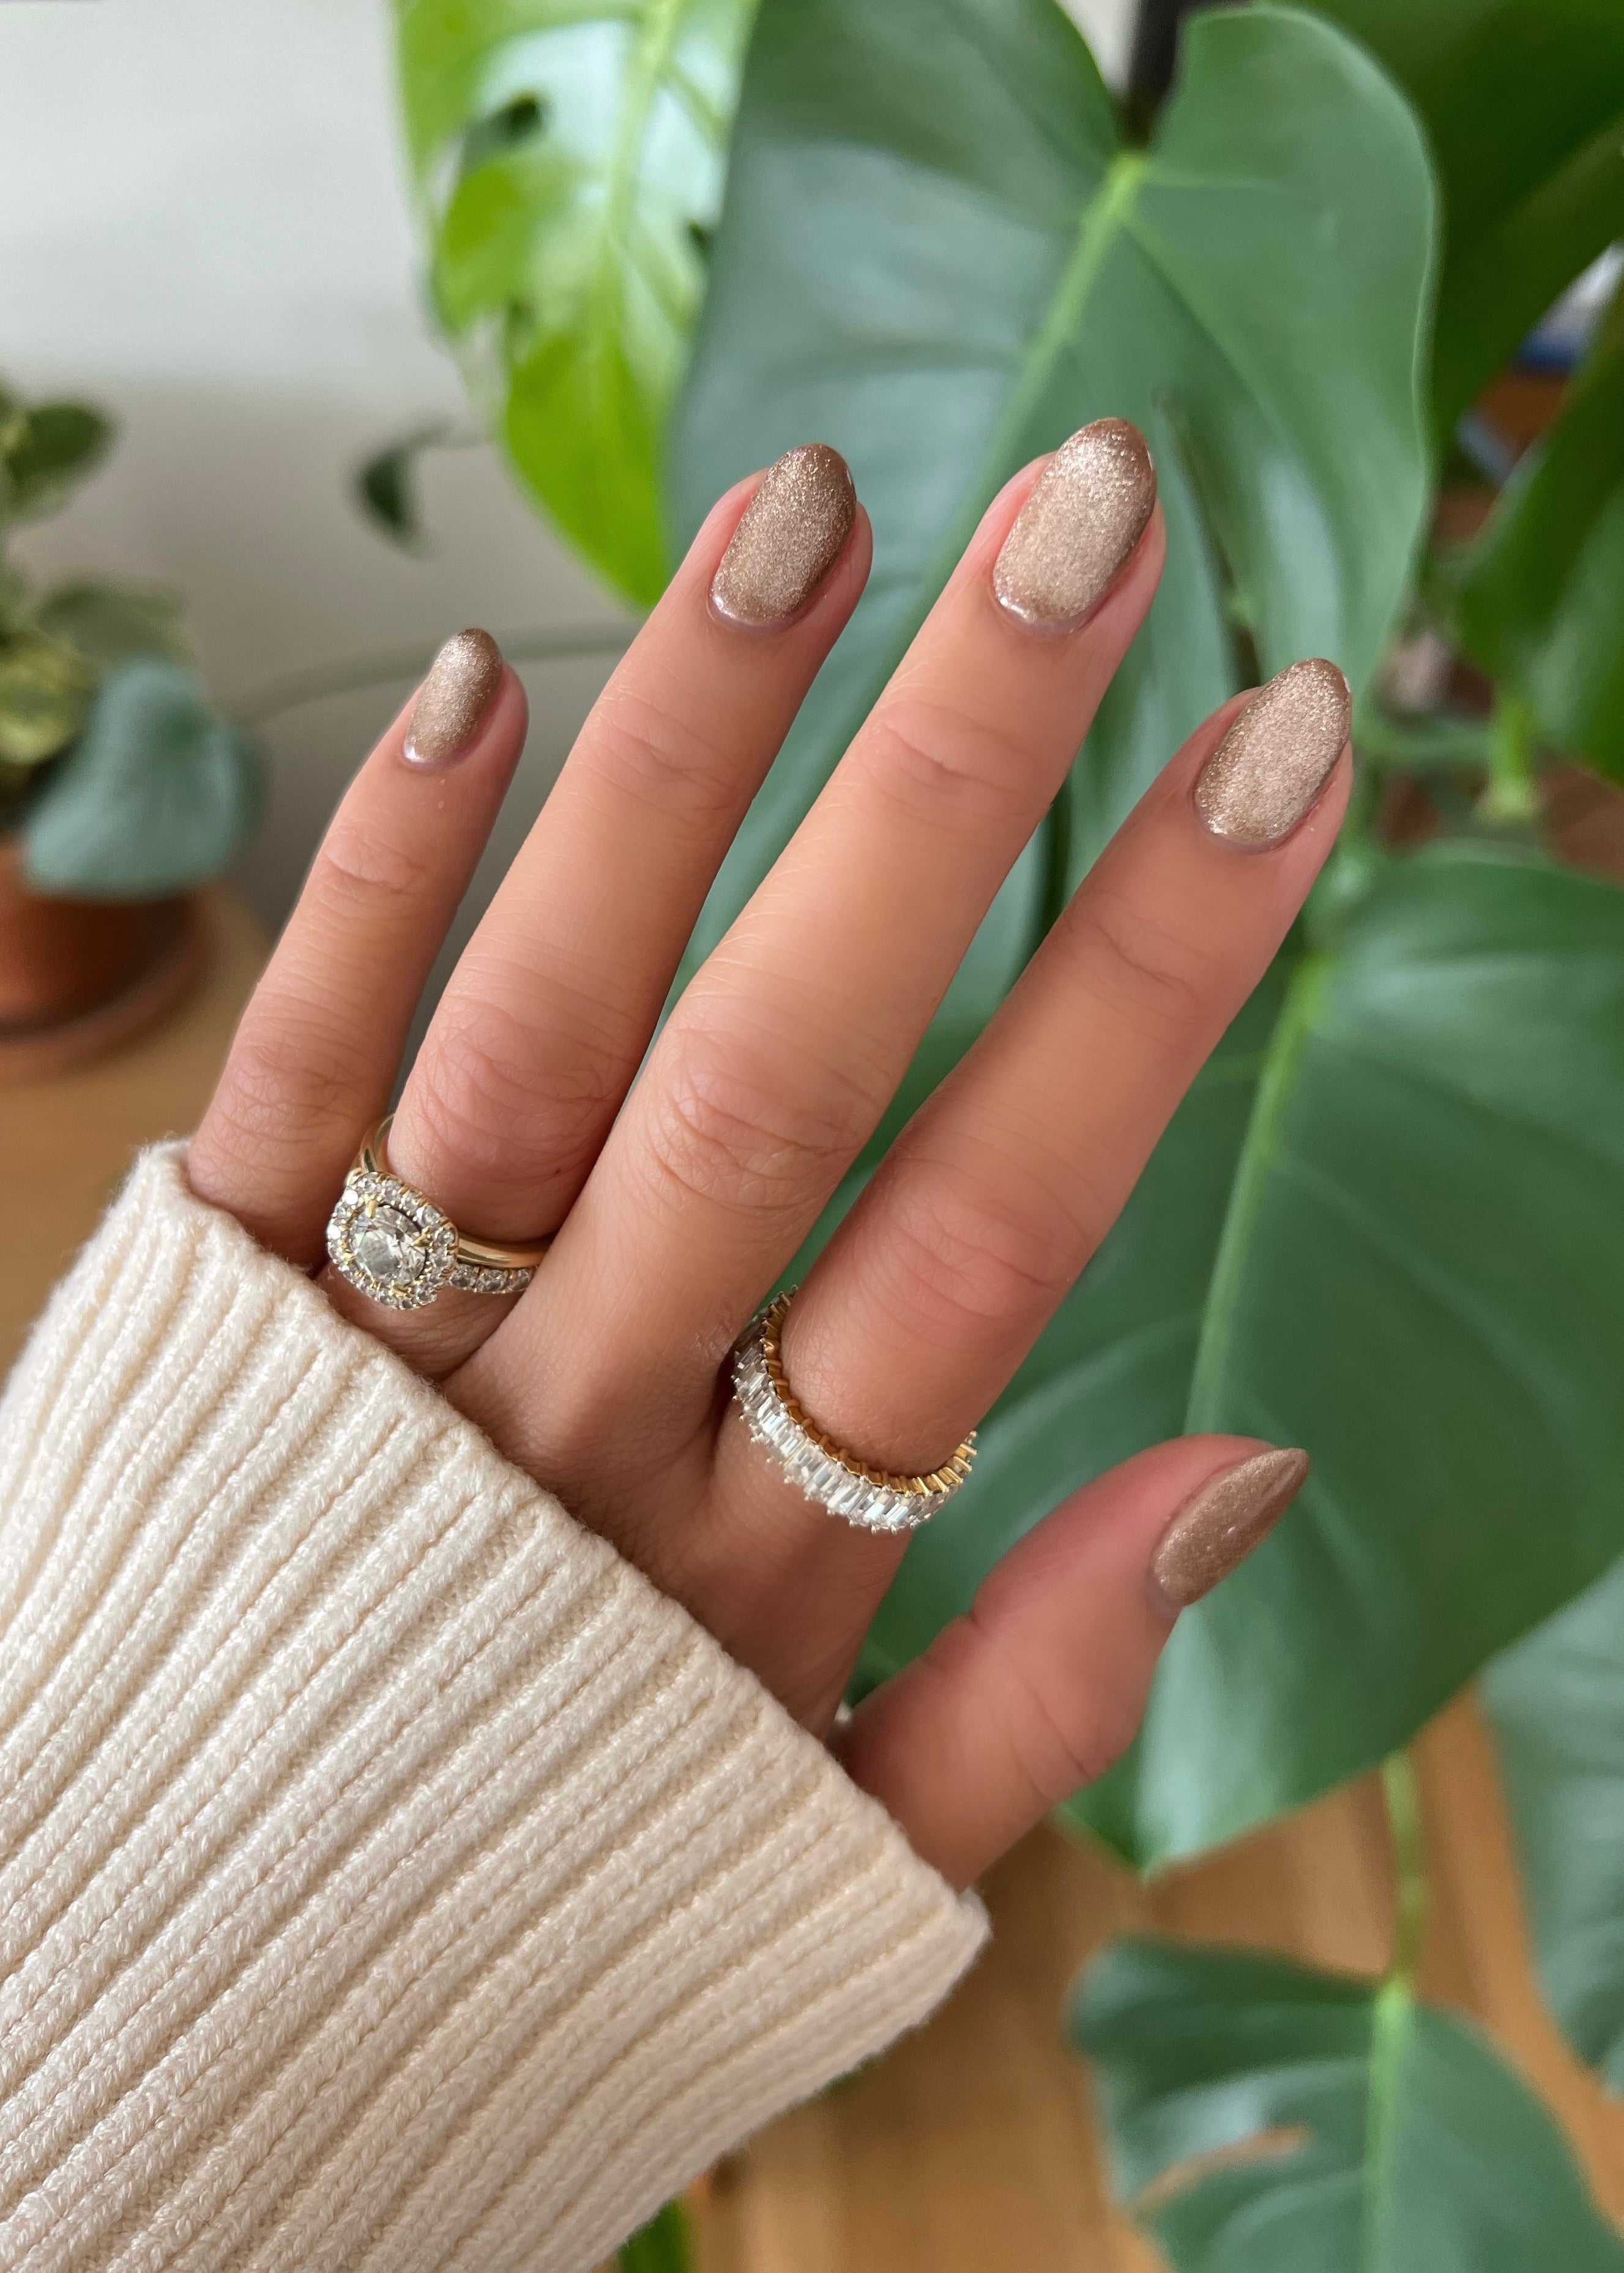 Nail salons in NYC for manicures, pedicures and nail designs